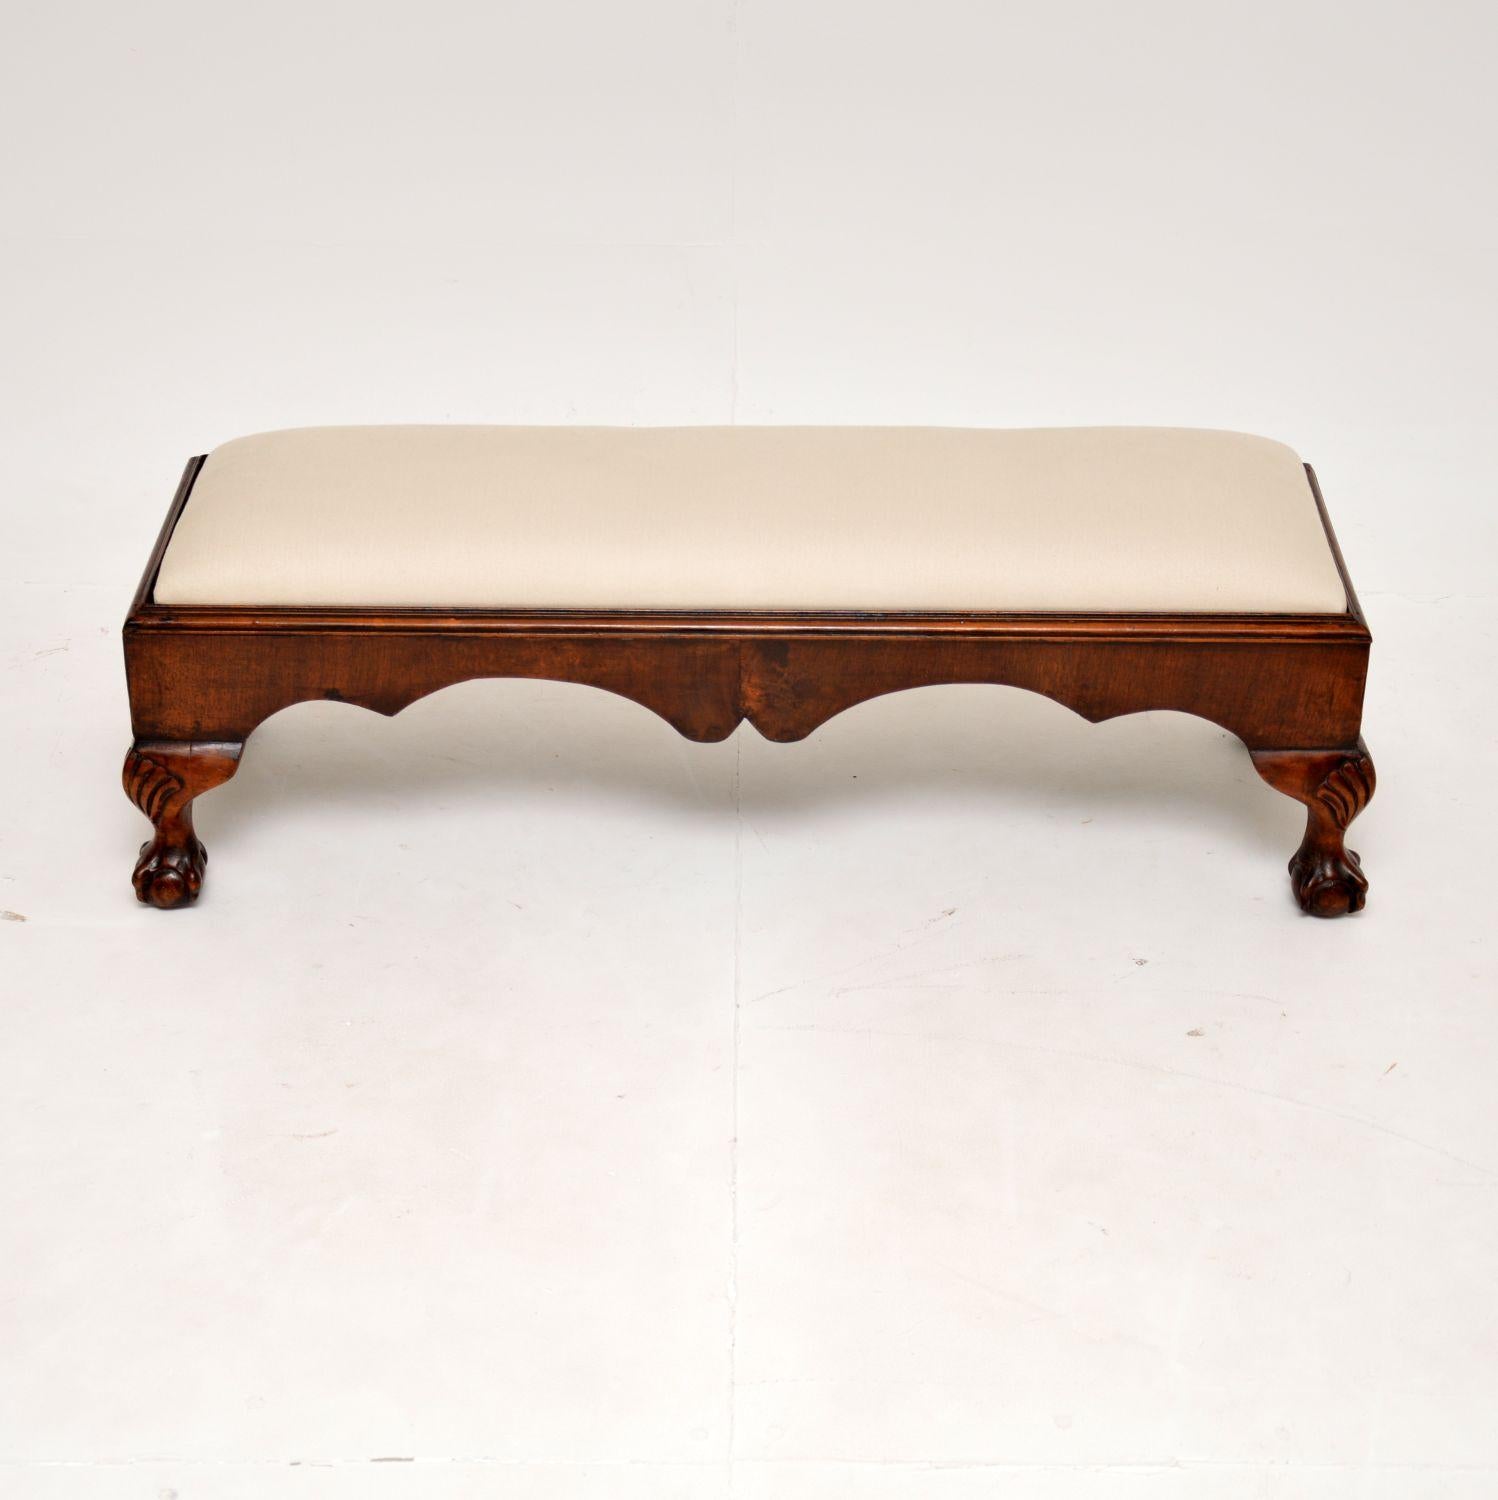 English Antique Chippendale Style Long Foot Stool